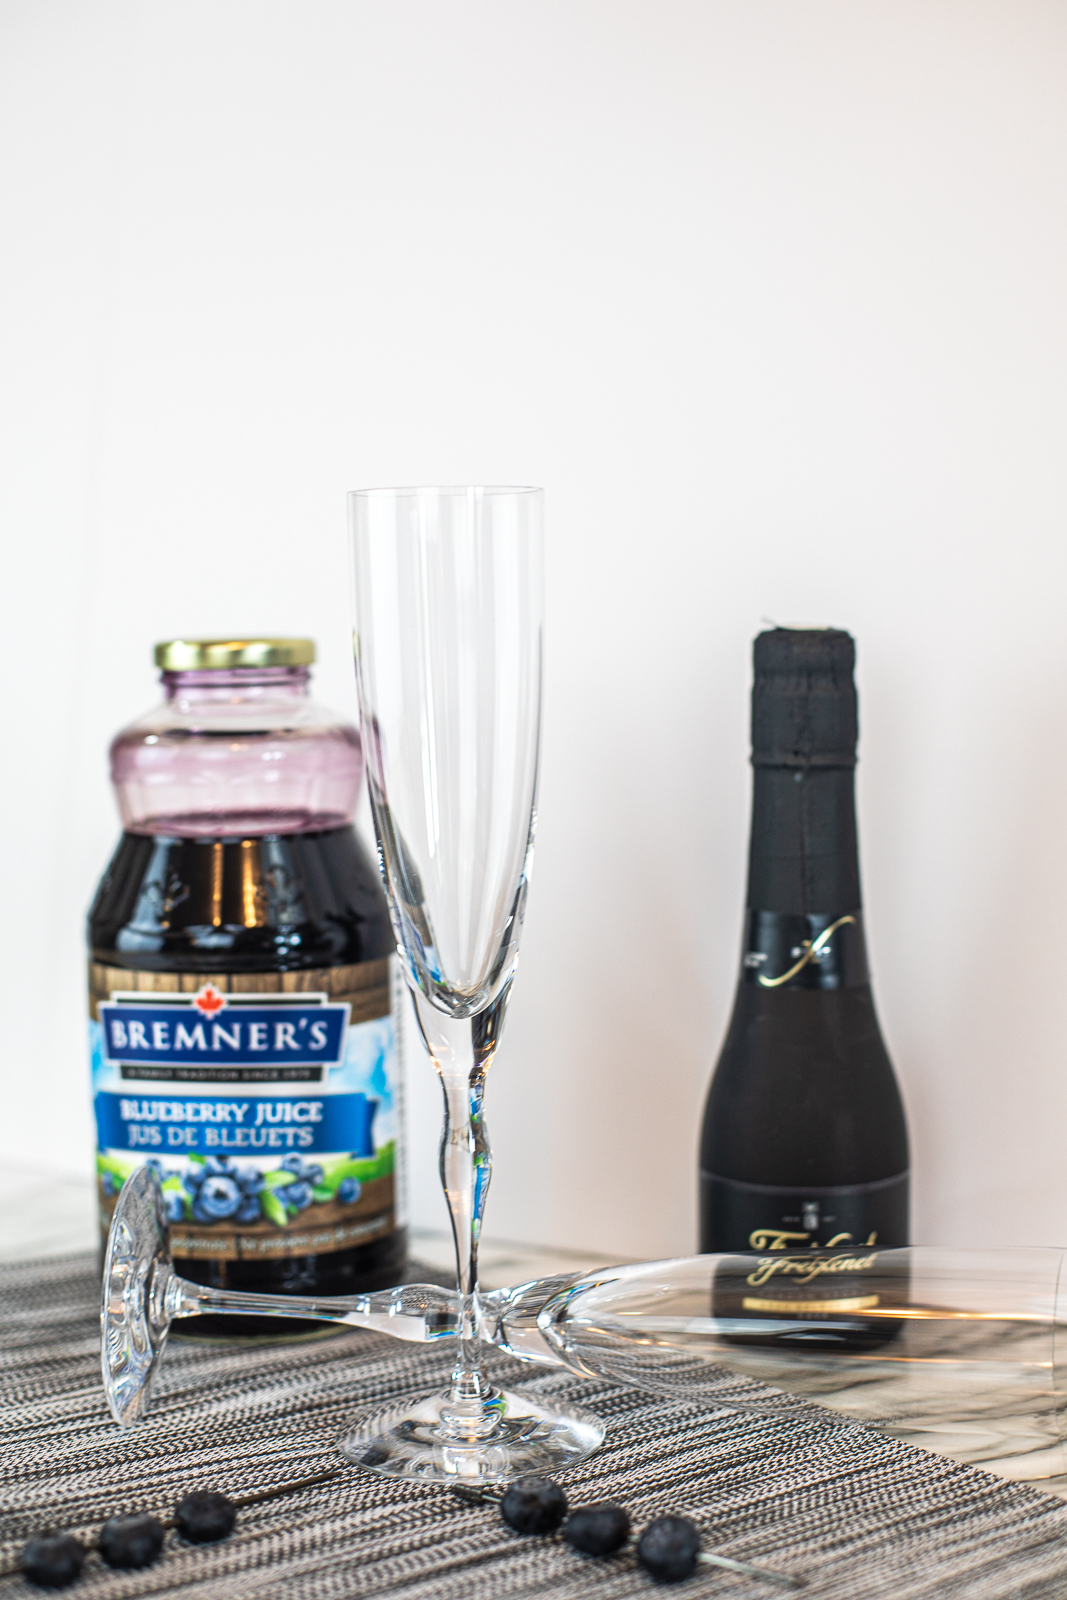 Picture showing ingredients: blueberry juice, sparkling wine, and two wine flutes. 